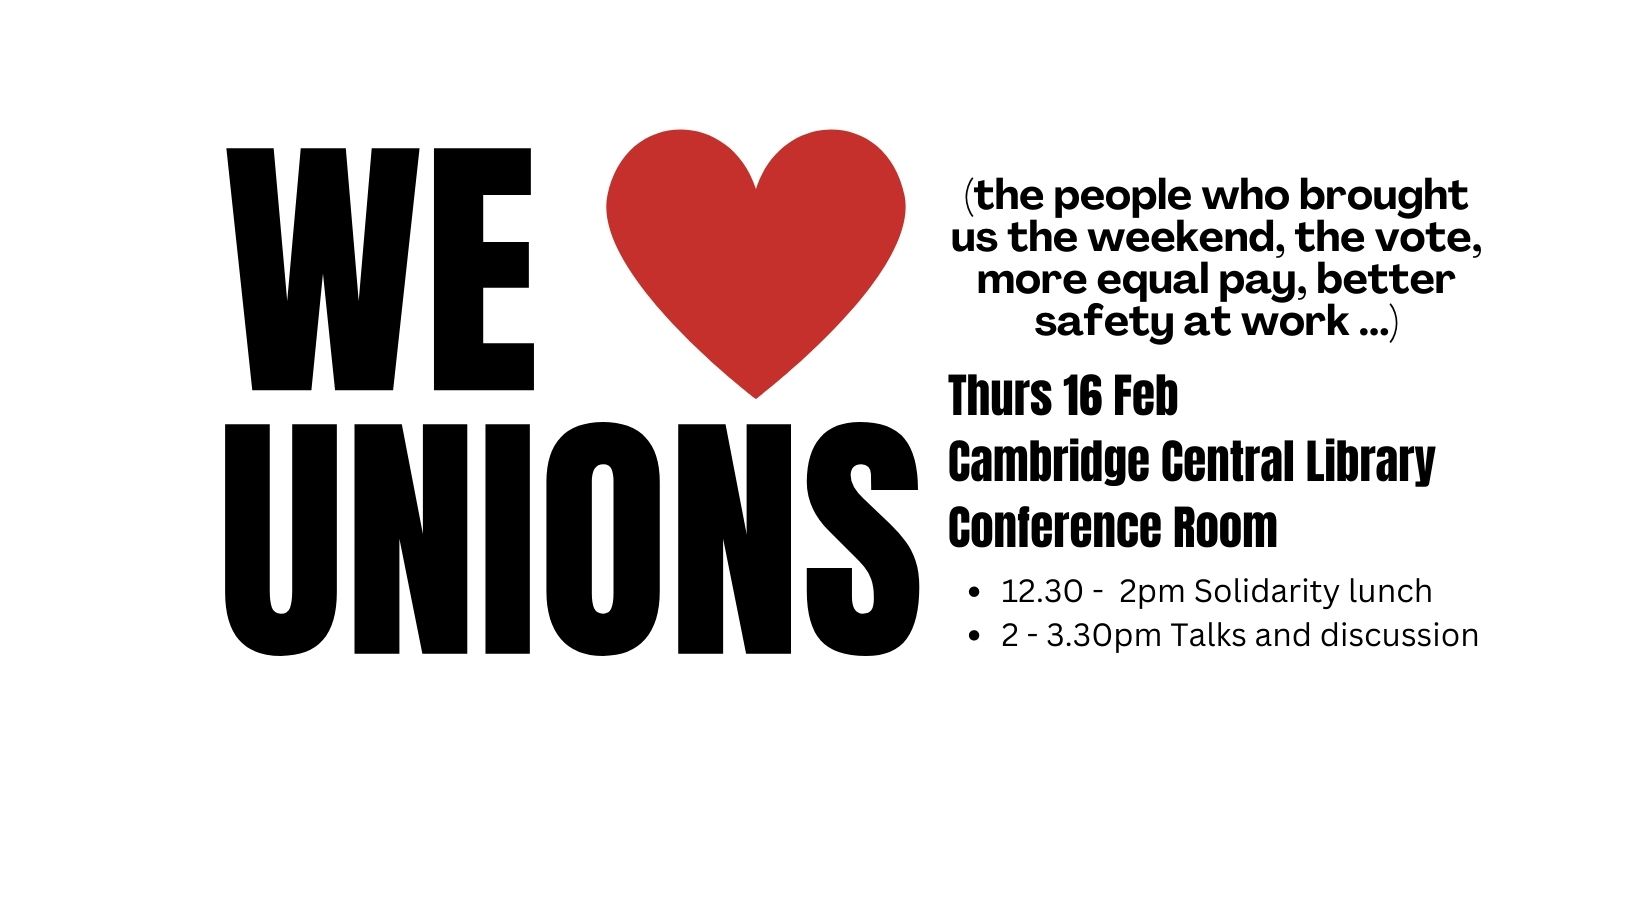 Love unions? Join us for a solidarity lunch on 16 Feb